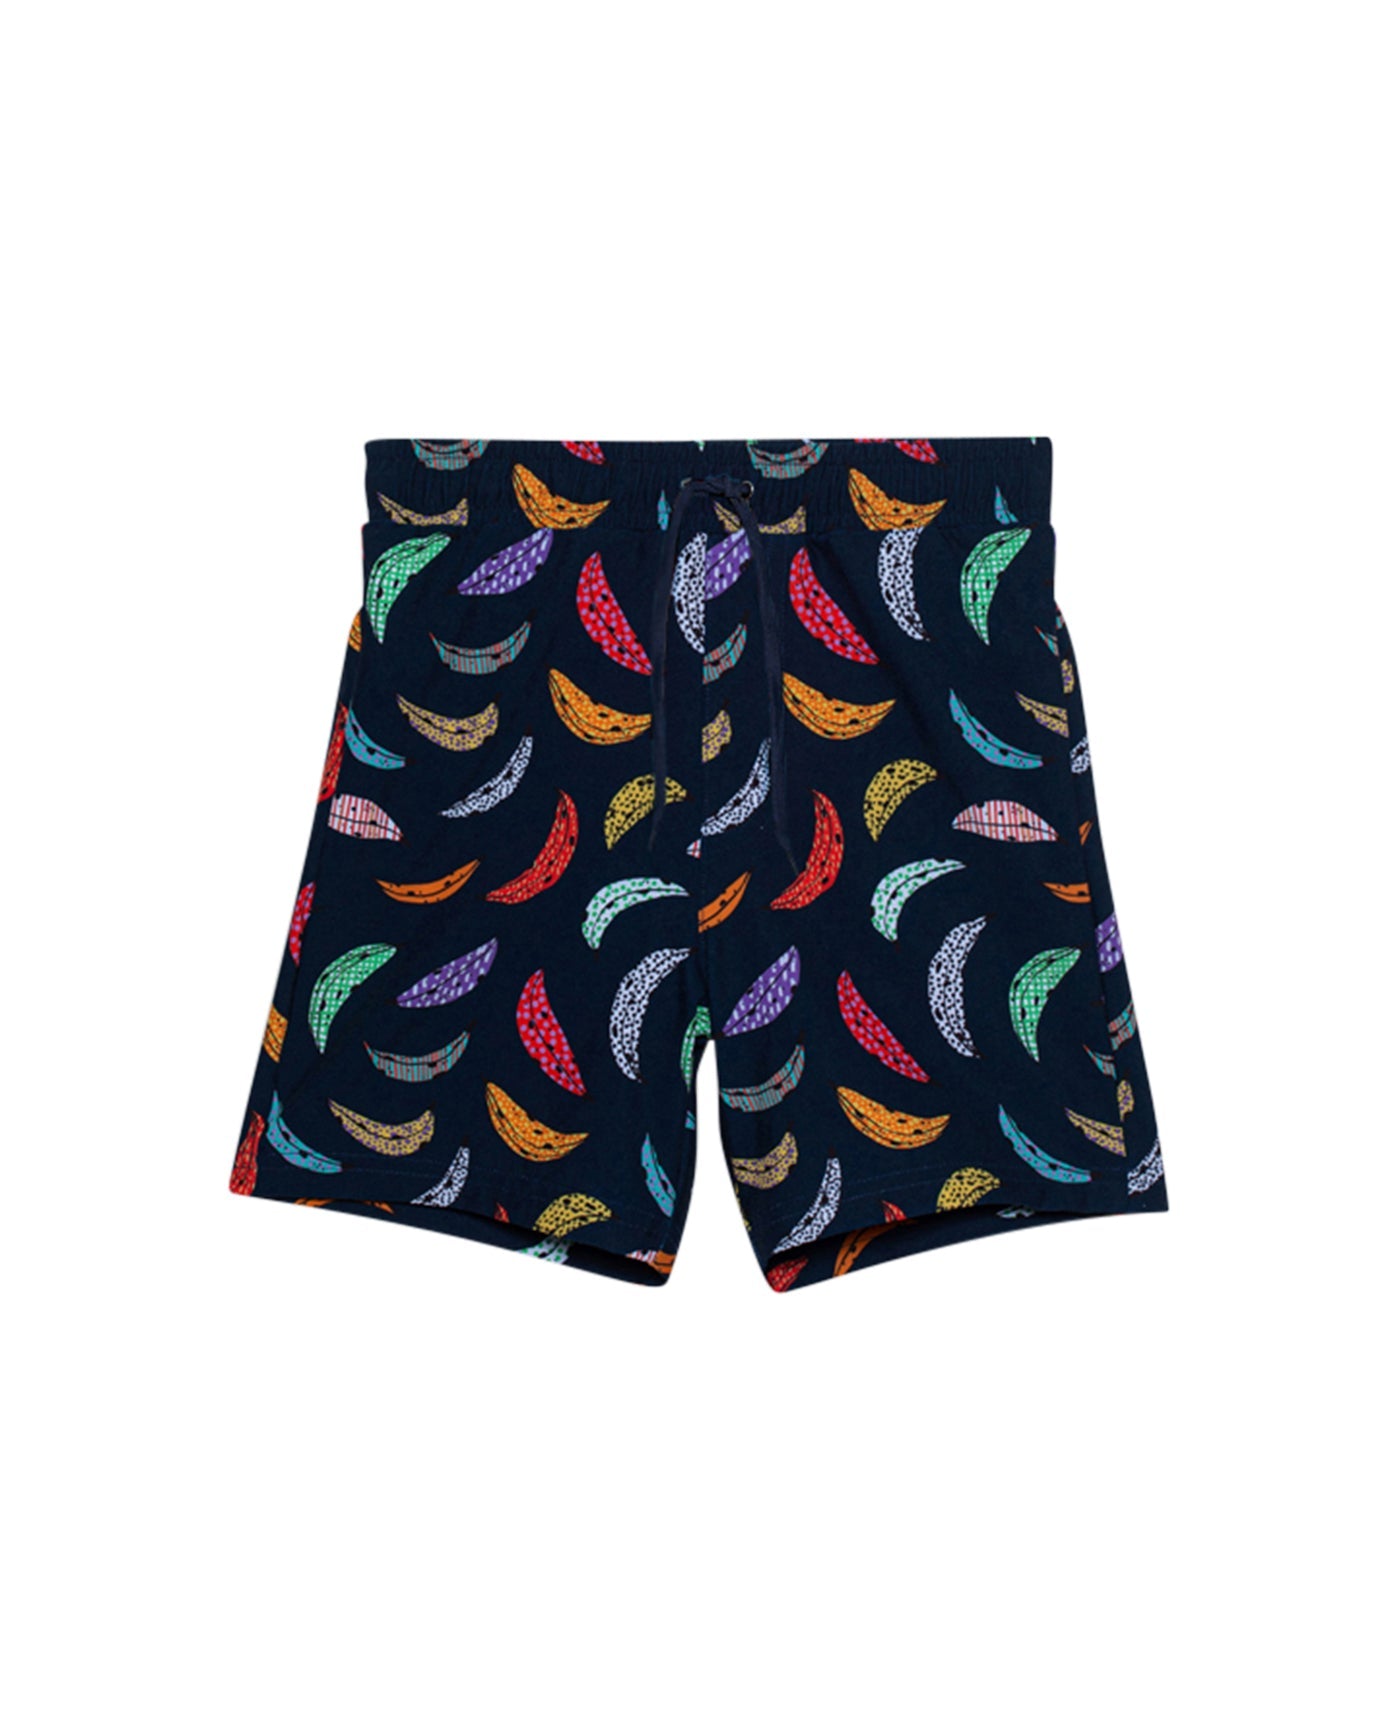 Front View Of Gottex Kids Graphic Swim Trunks | GOTTEX KIDS GRAPHIC BLUE FEATHERS